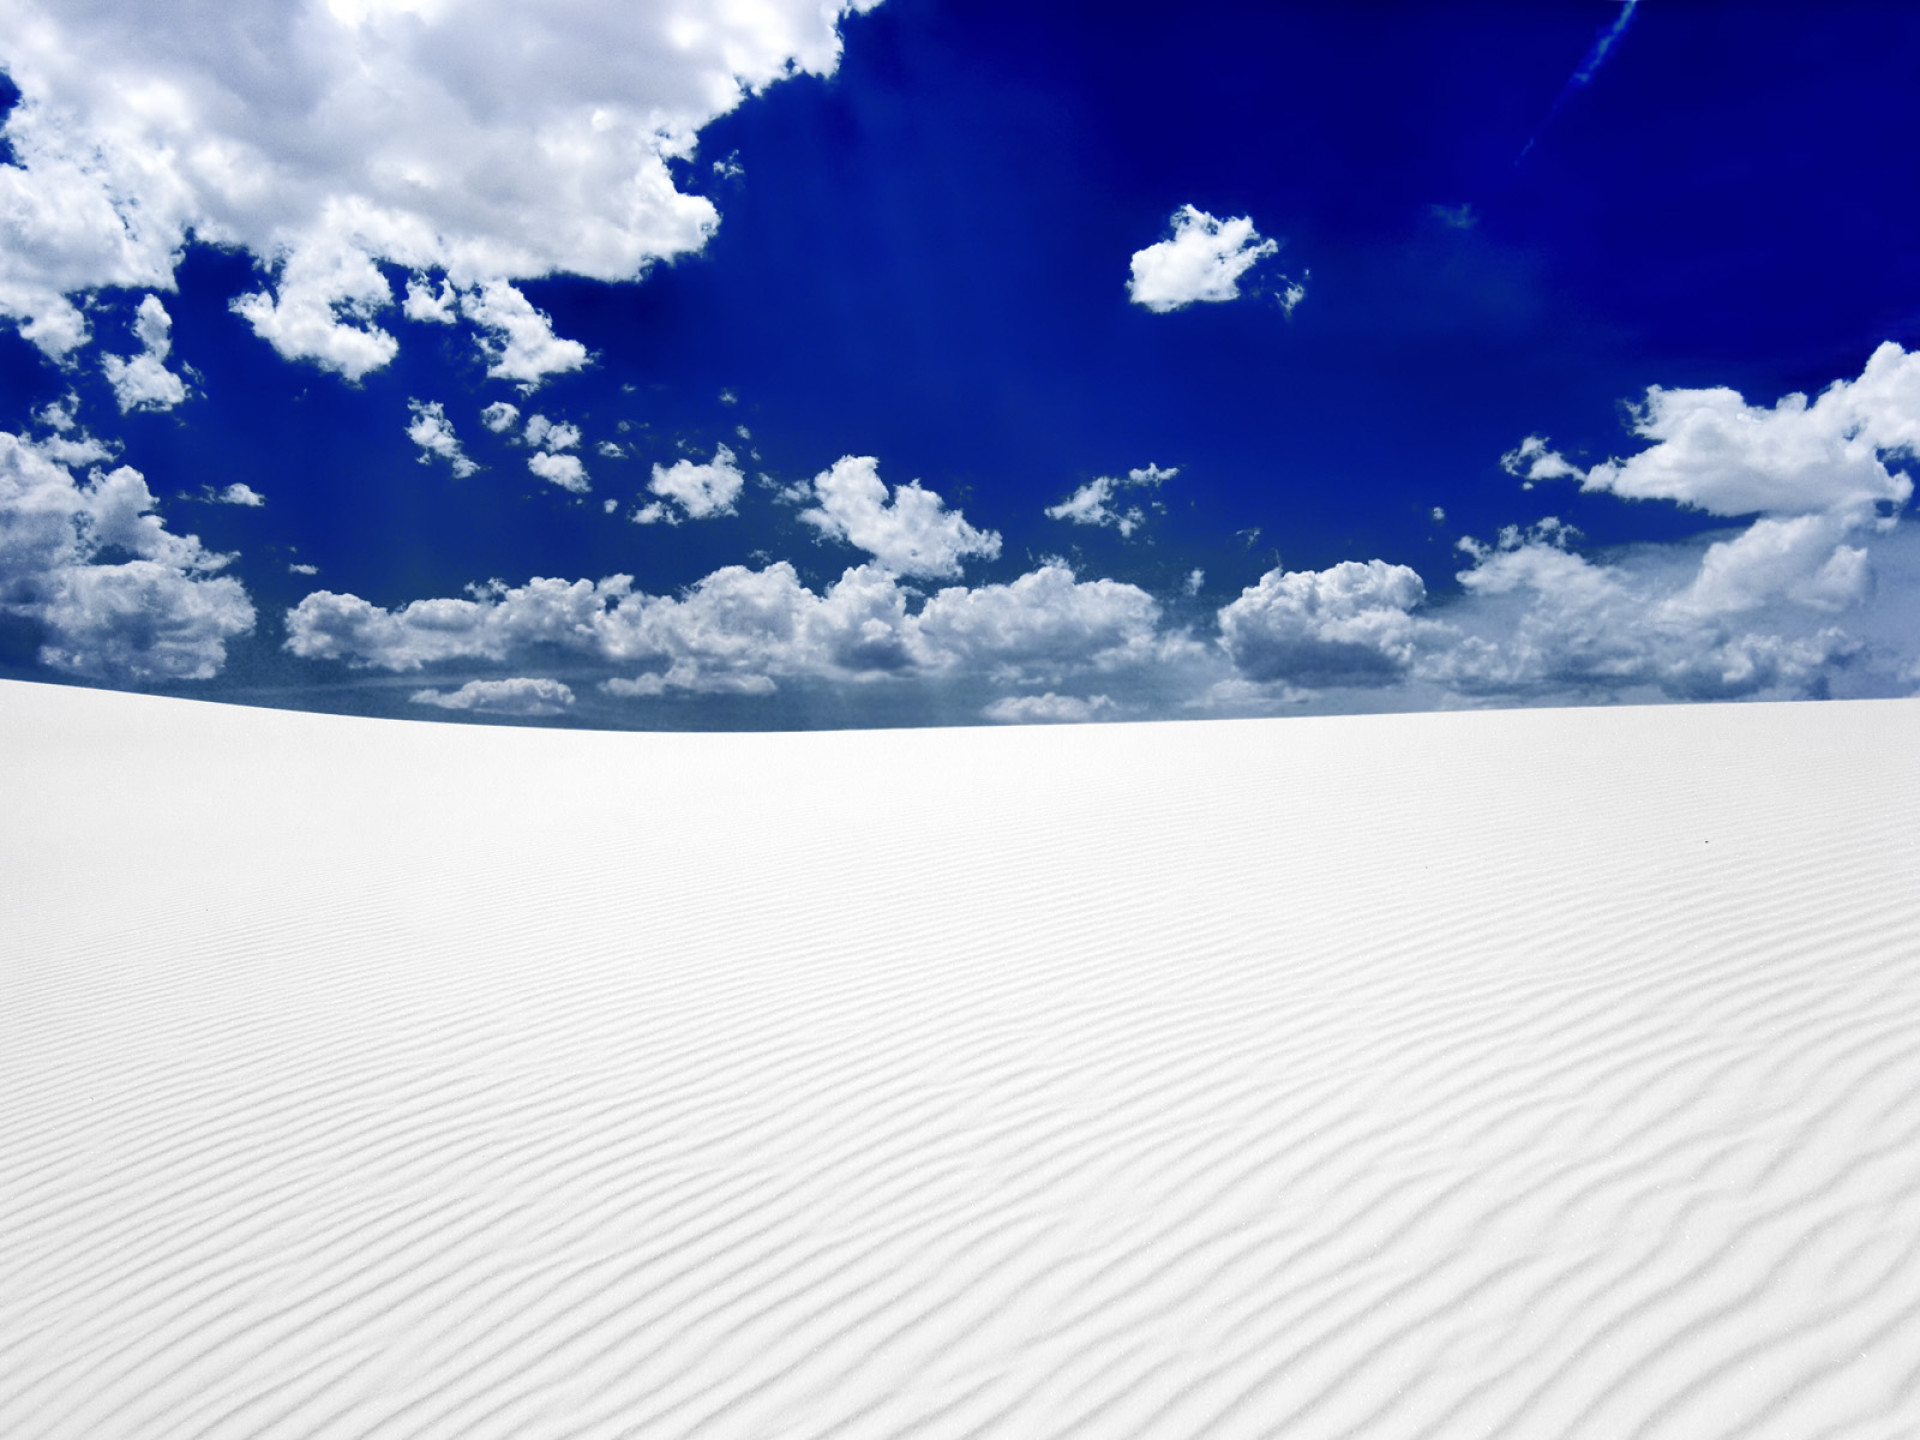 White Desert Deep Blue Sky wallpapers and stock photos